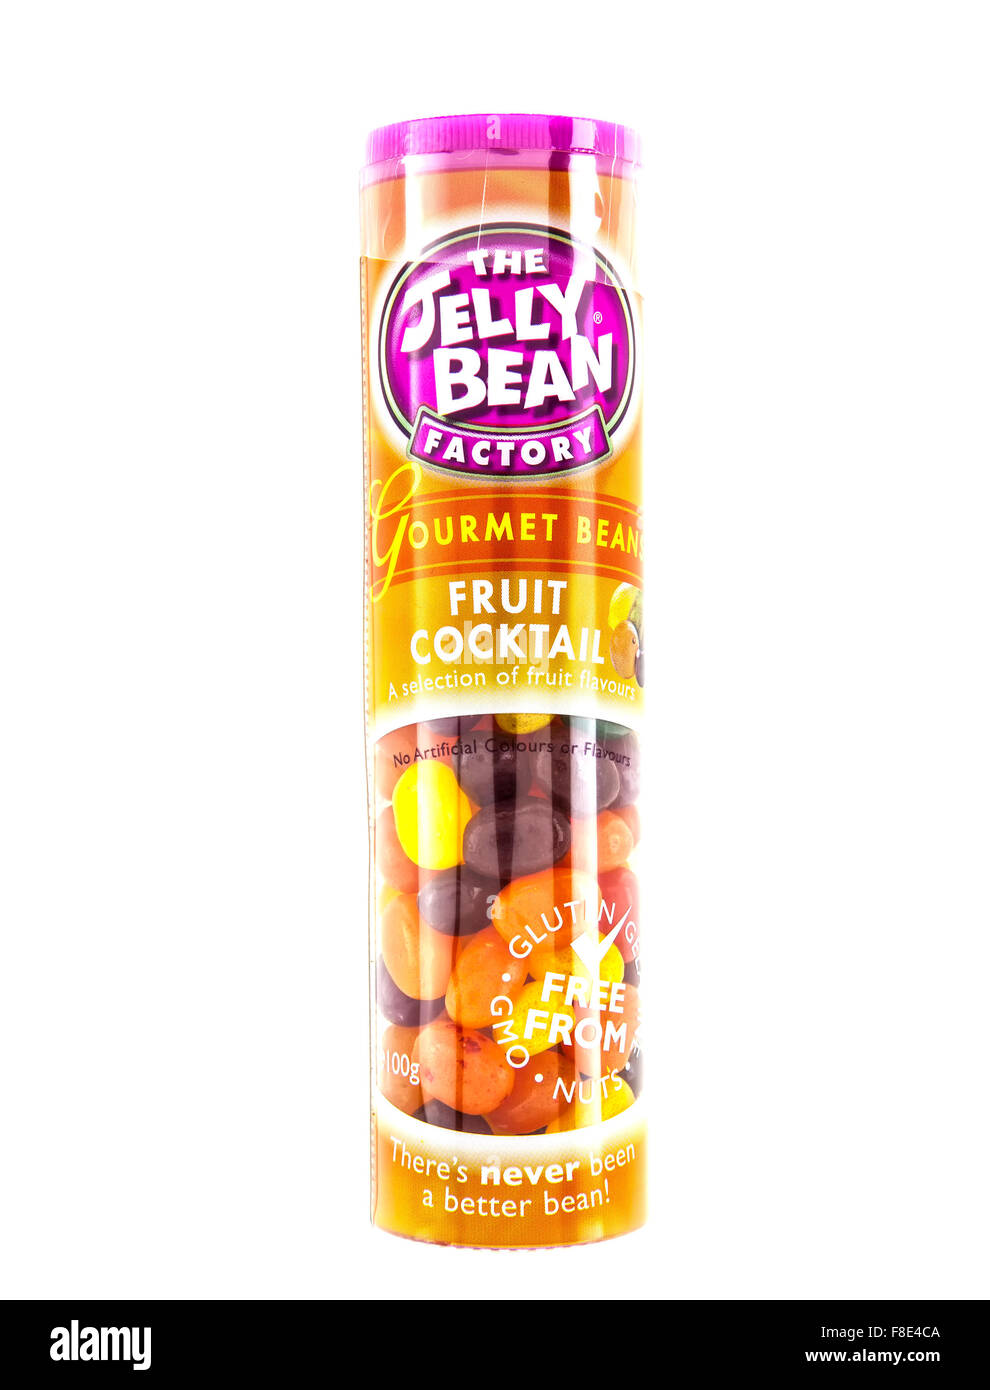 Tube of 'The Jelly Bean Factory' Gourmet Beans, Fruit Cocktail on a white background. Stock Photo